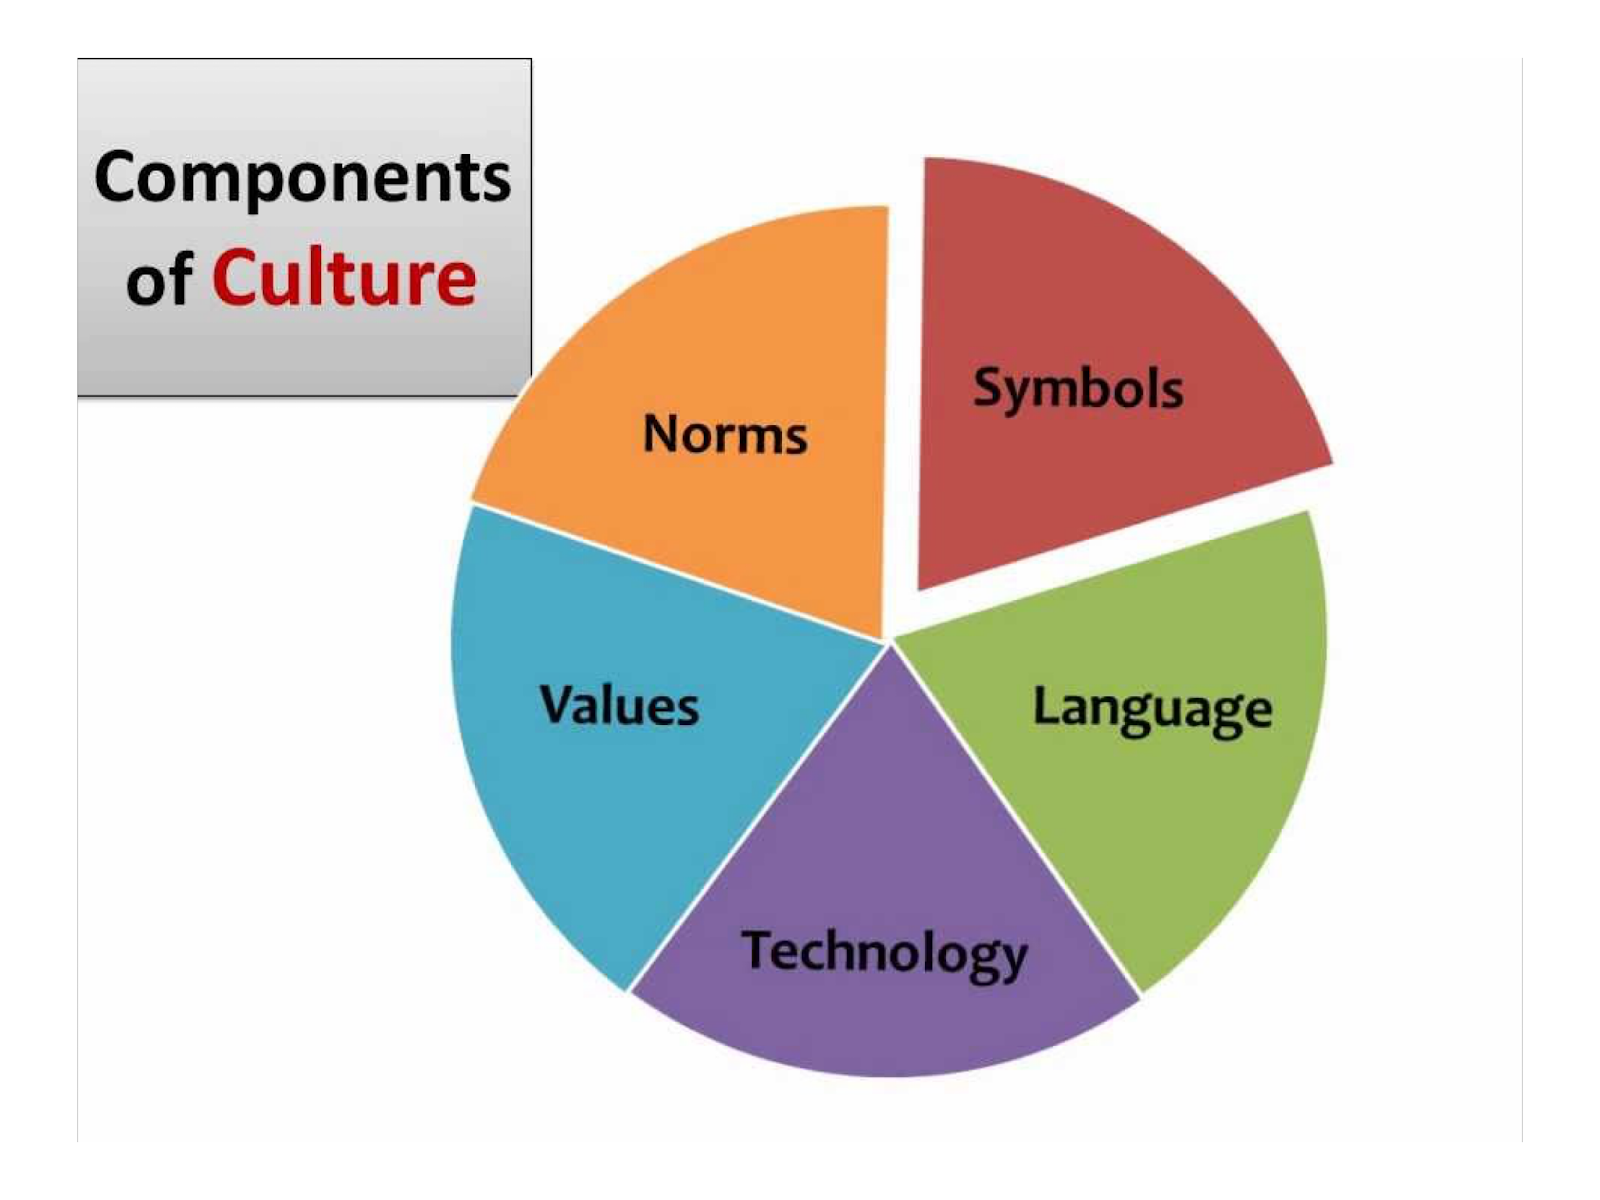 Culture values. Components of Culture. The Concept of Culture. Components of Culture values. Culture and values.